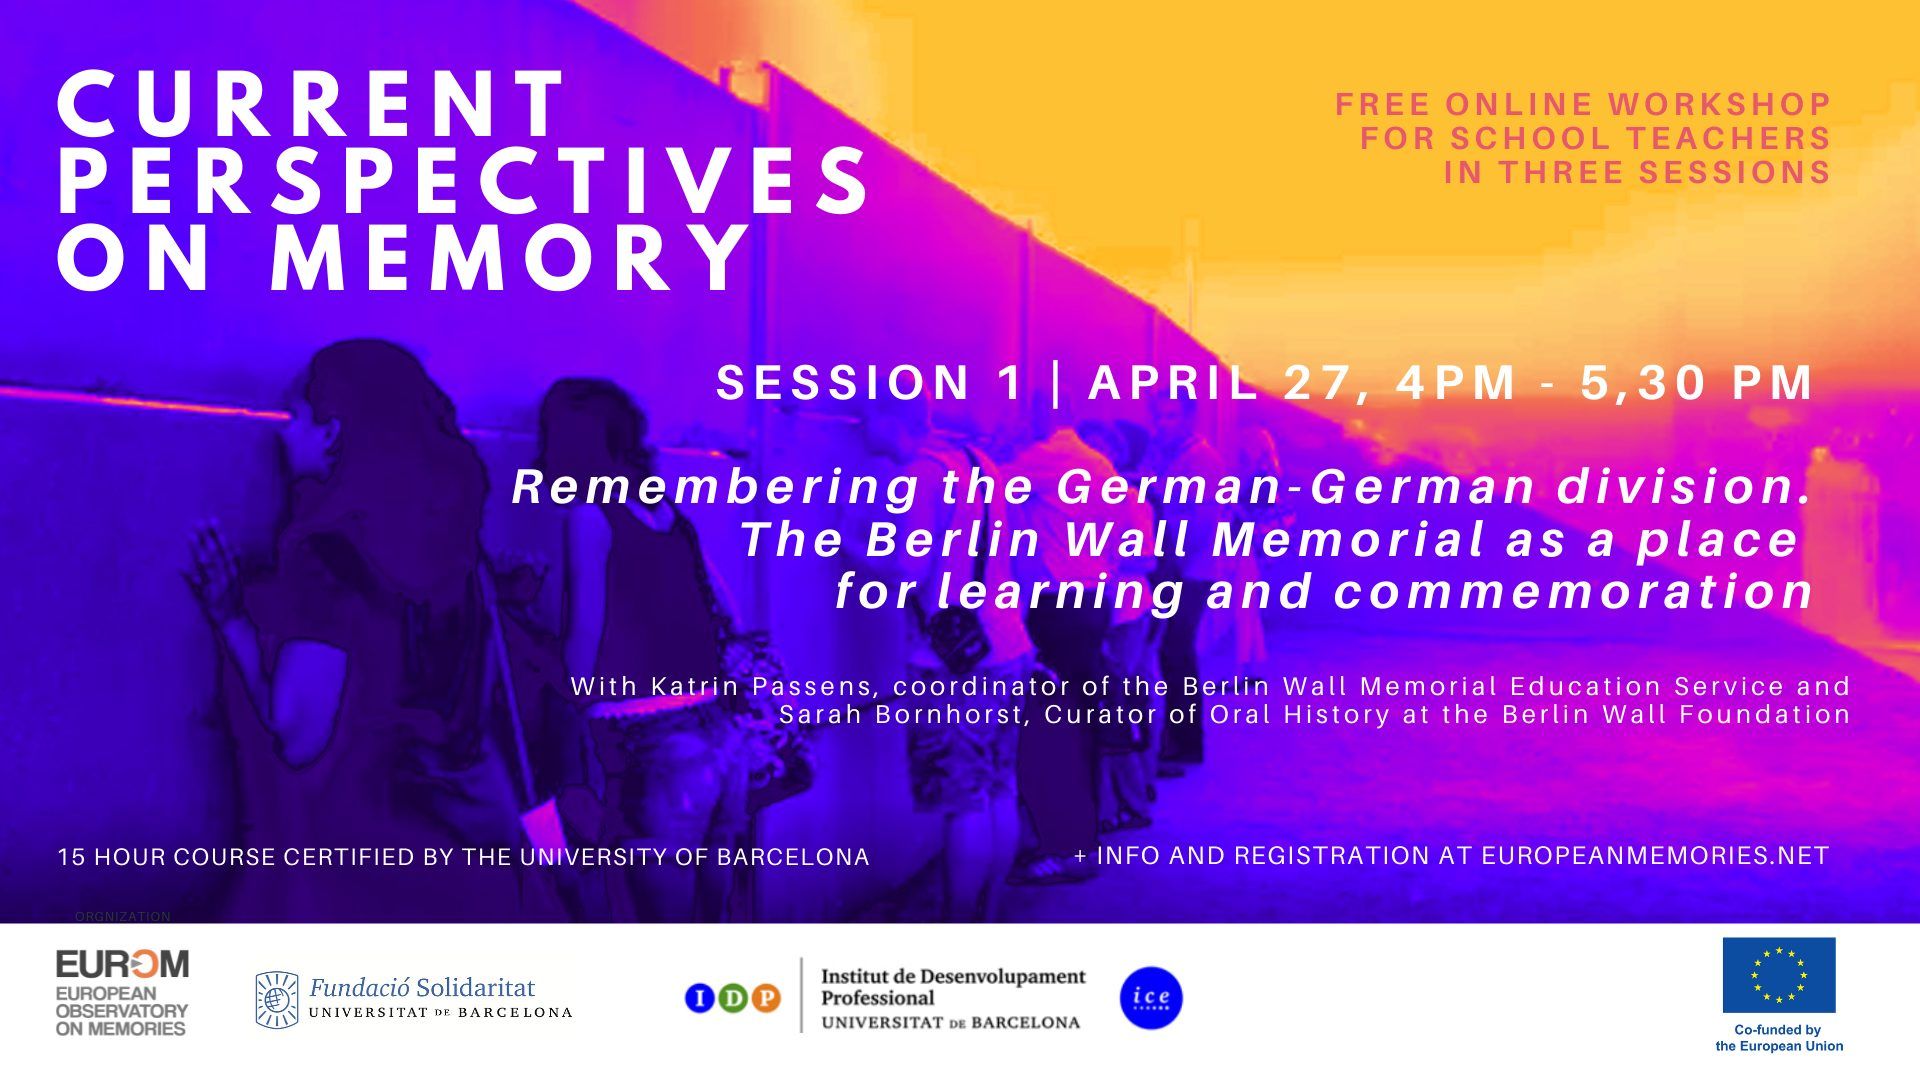 Current perspectives on memory | Berlin Wall Foundation